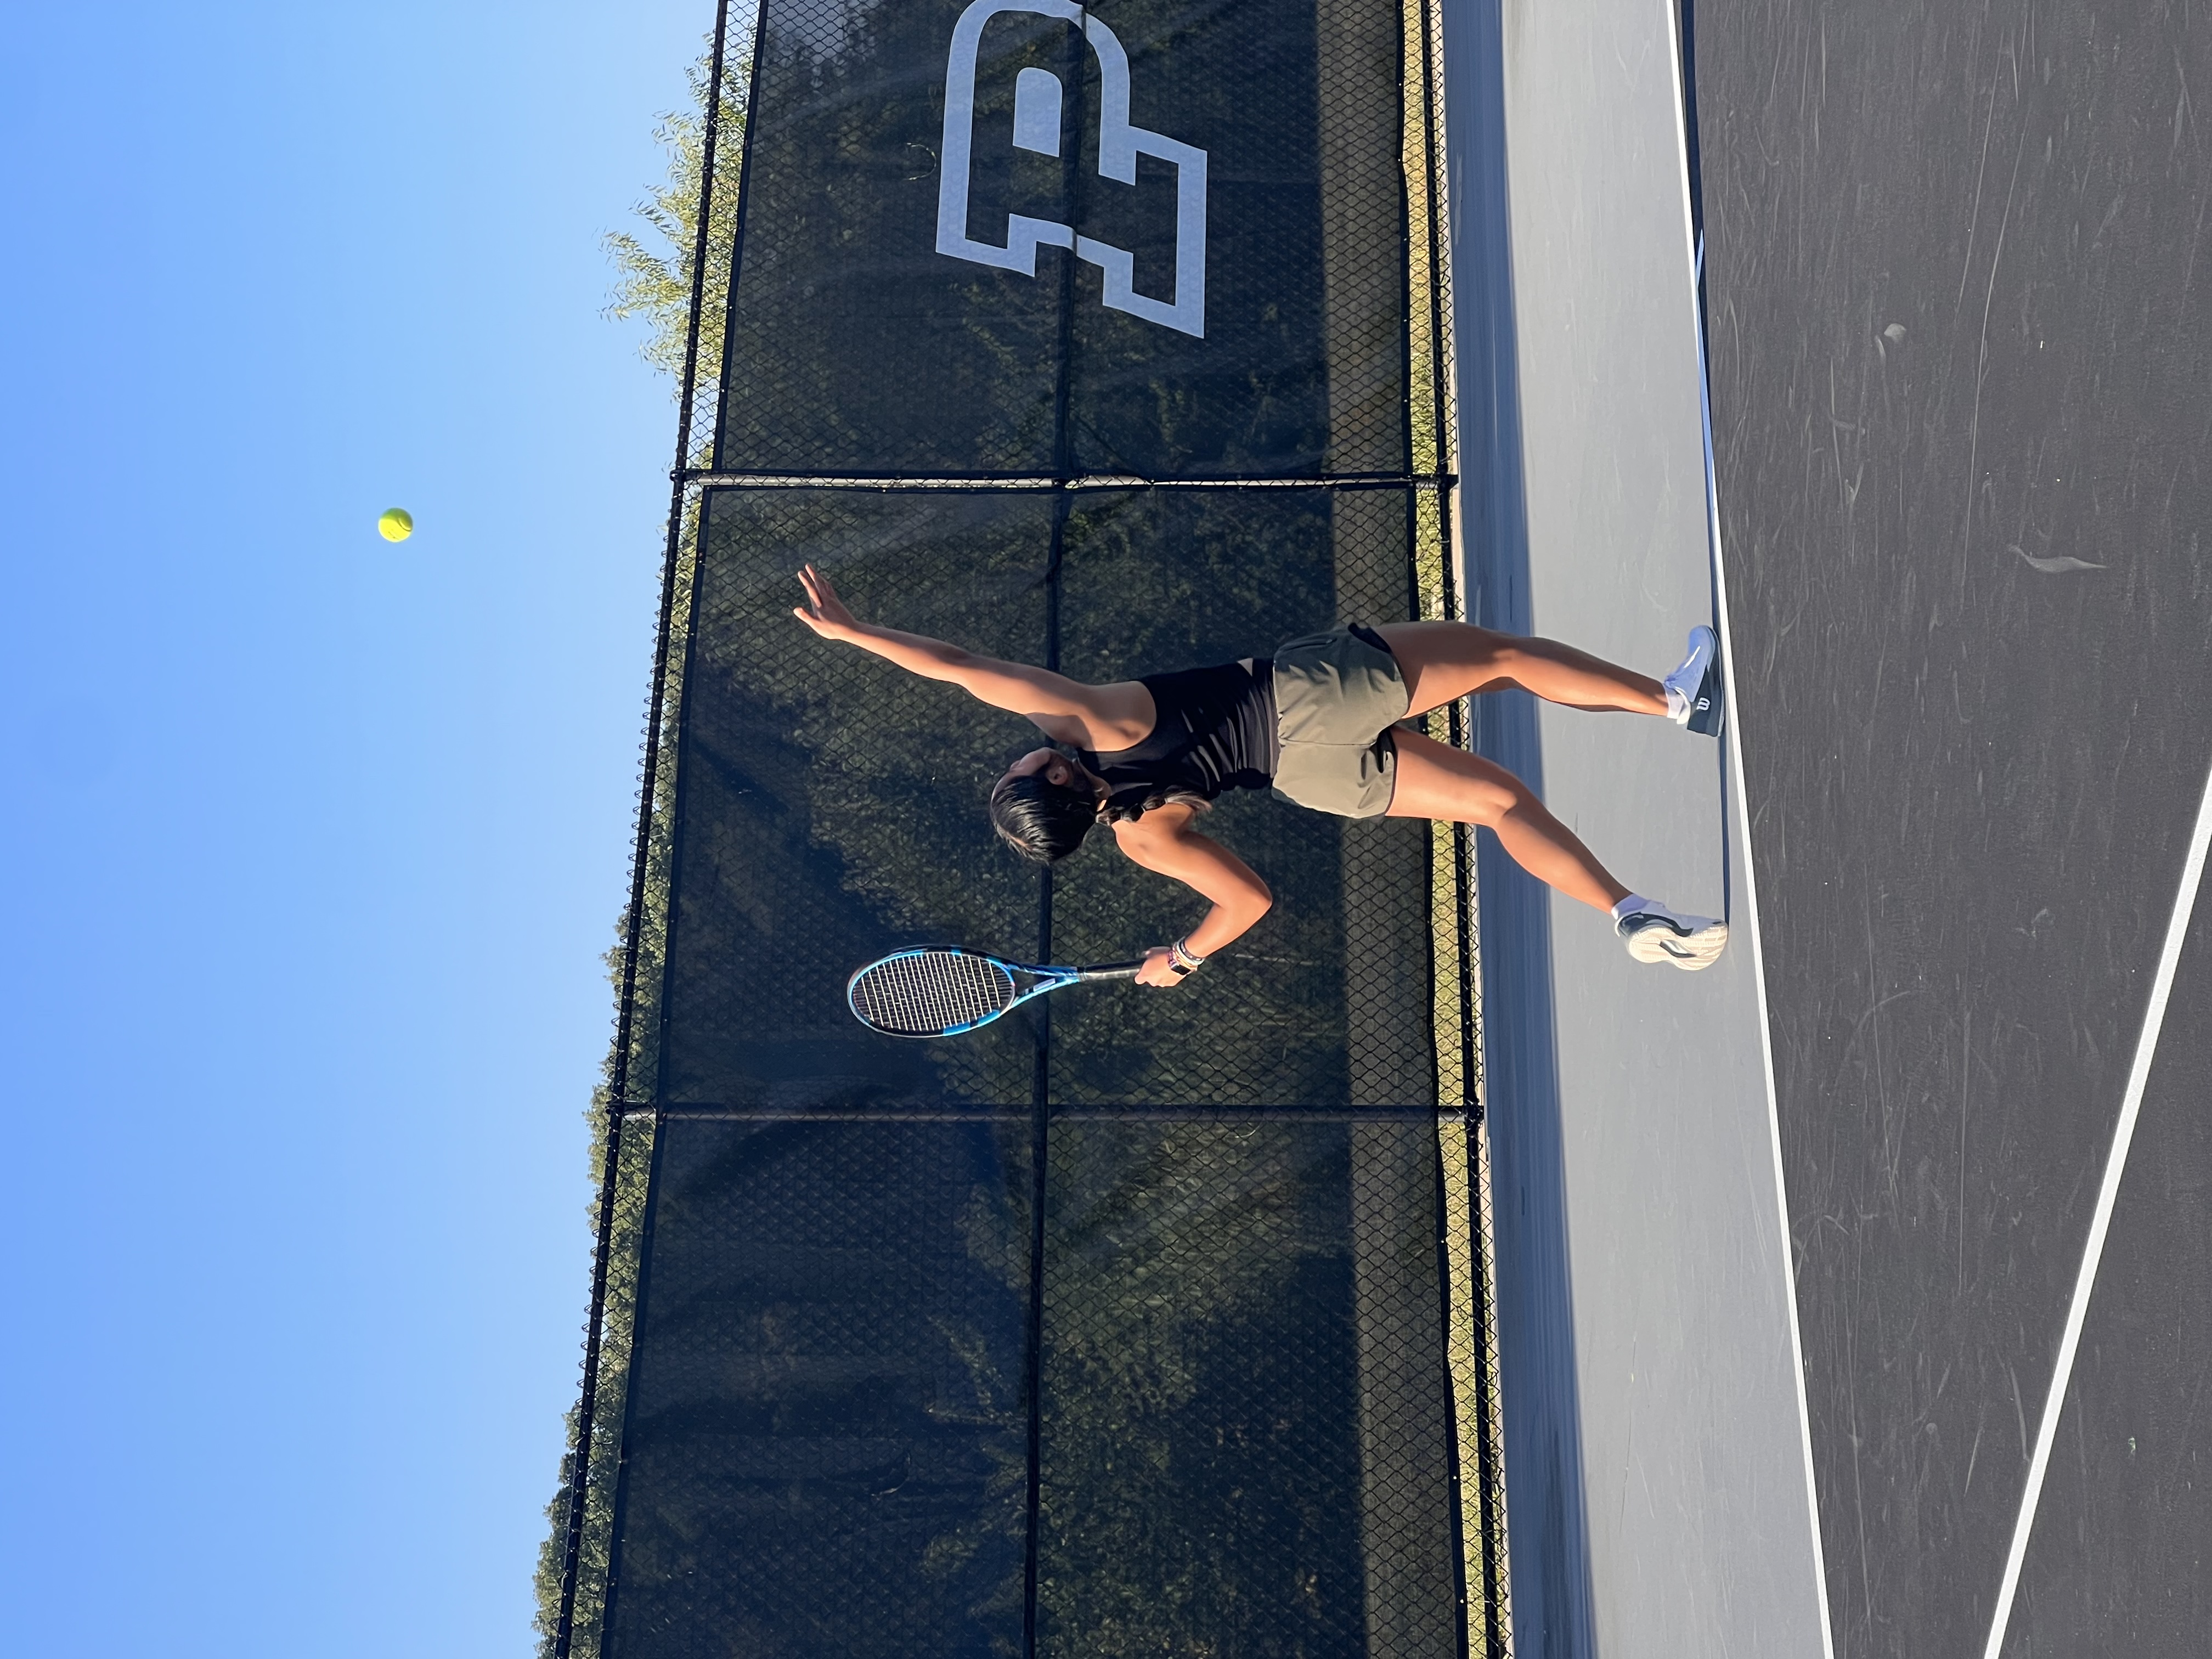 Hannah S. teaches tennis lessons in Fishers, IN